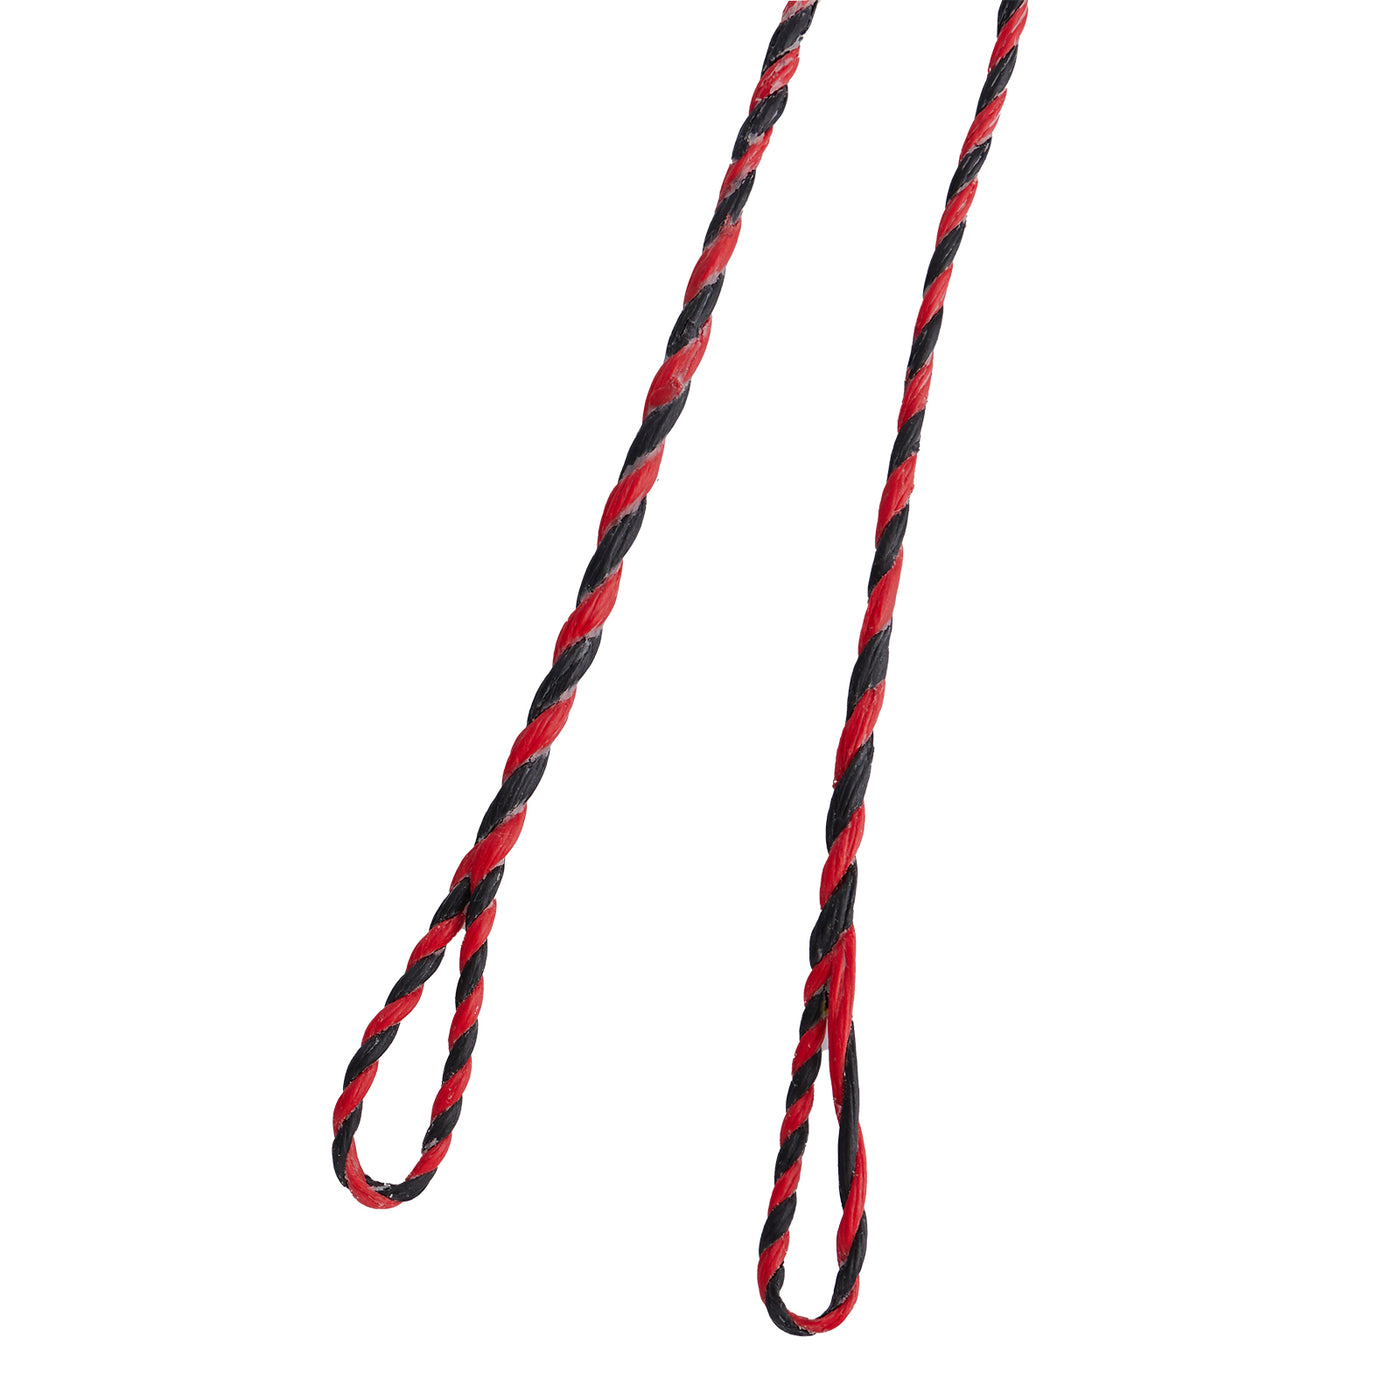 53"/57" Black/Red Flemish Twist Bowstring For Takedown Hunting Bow